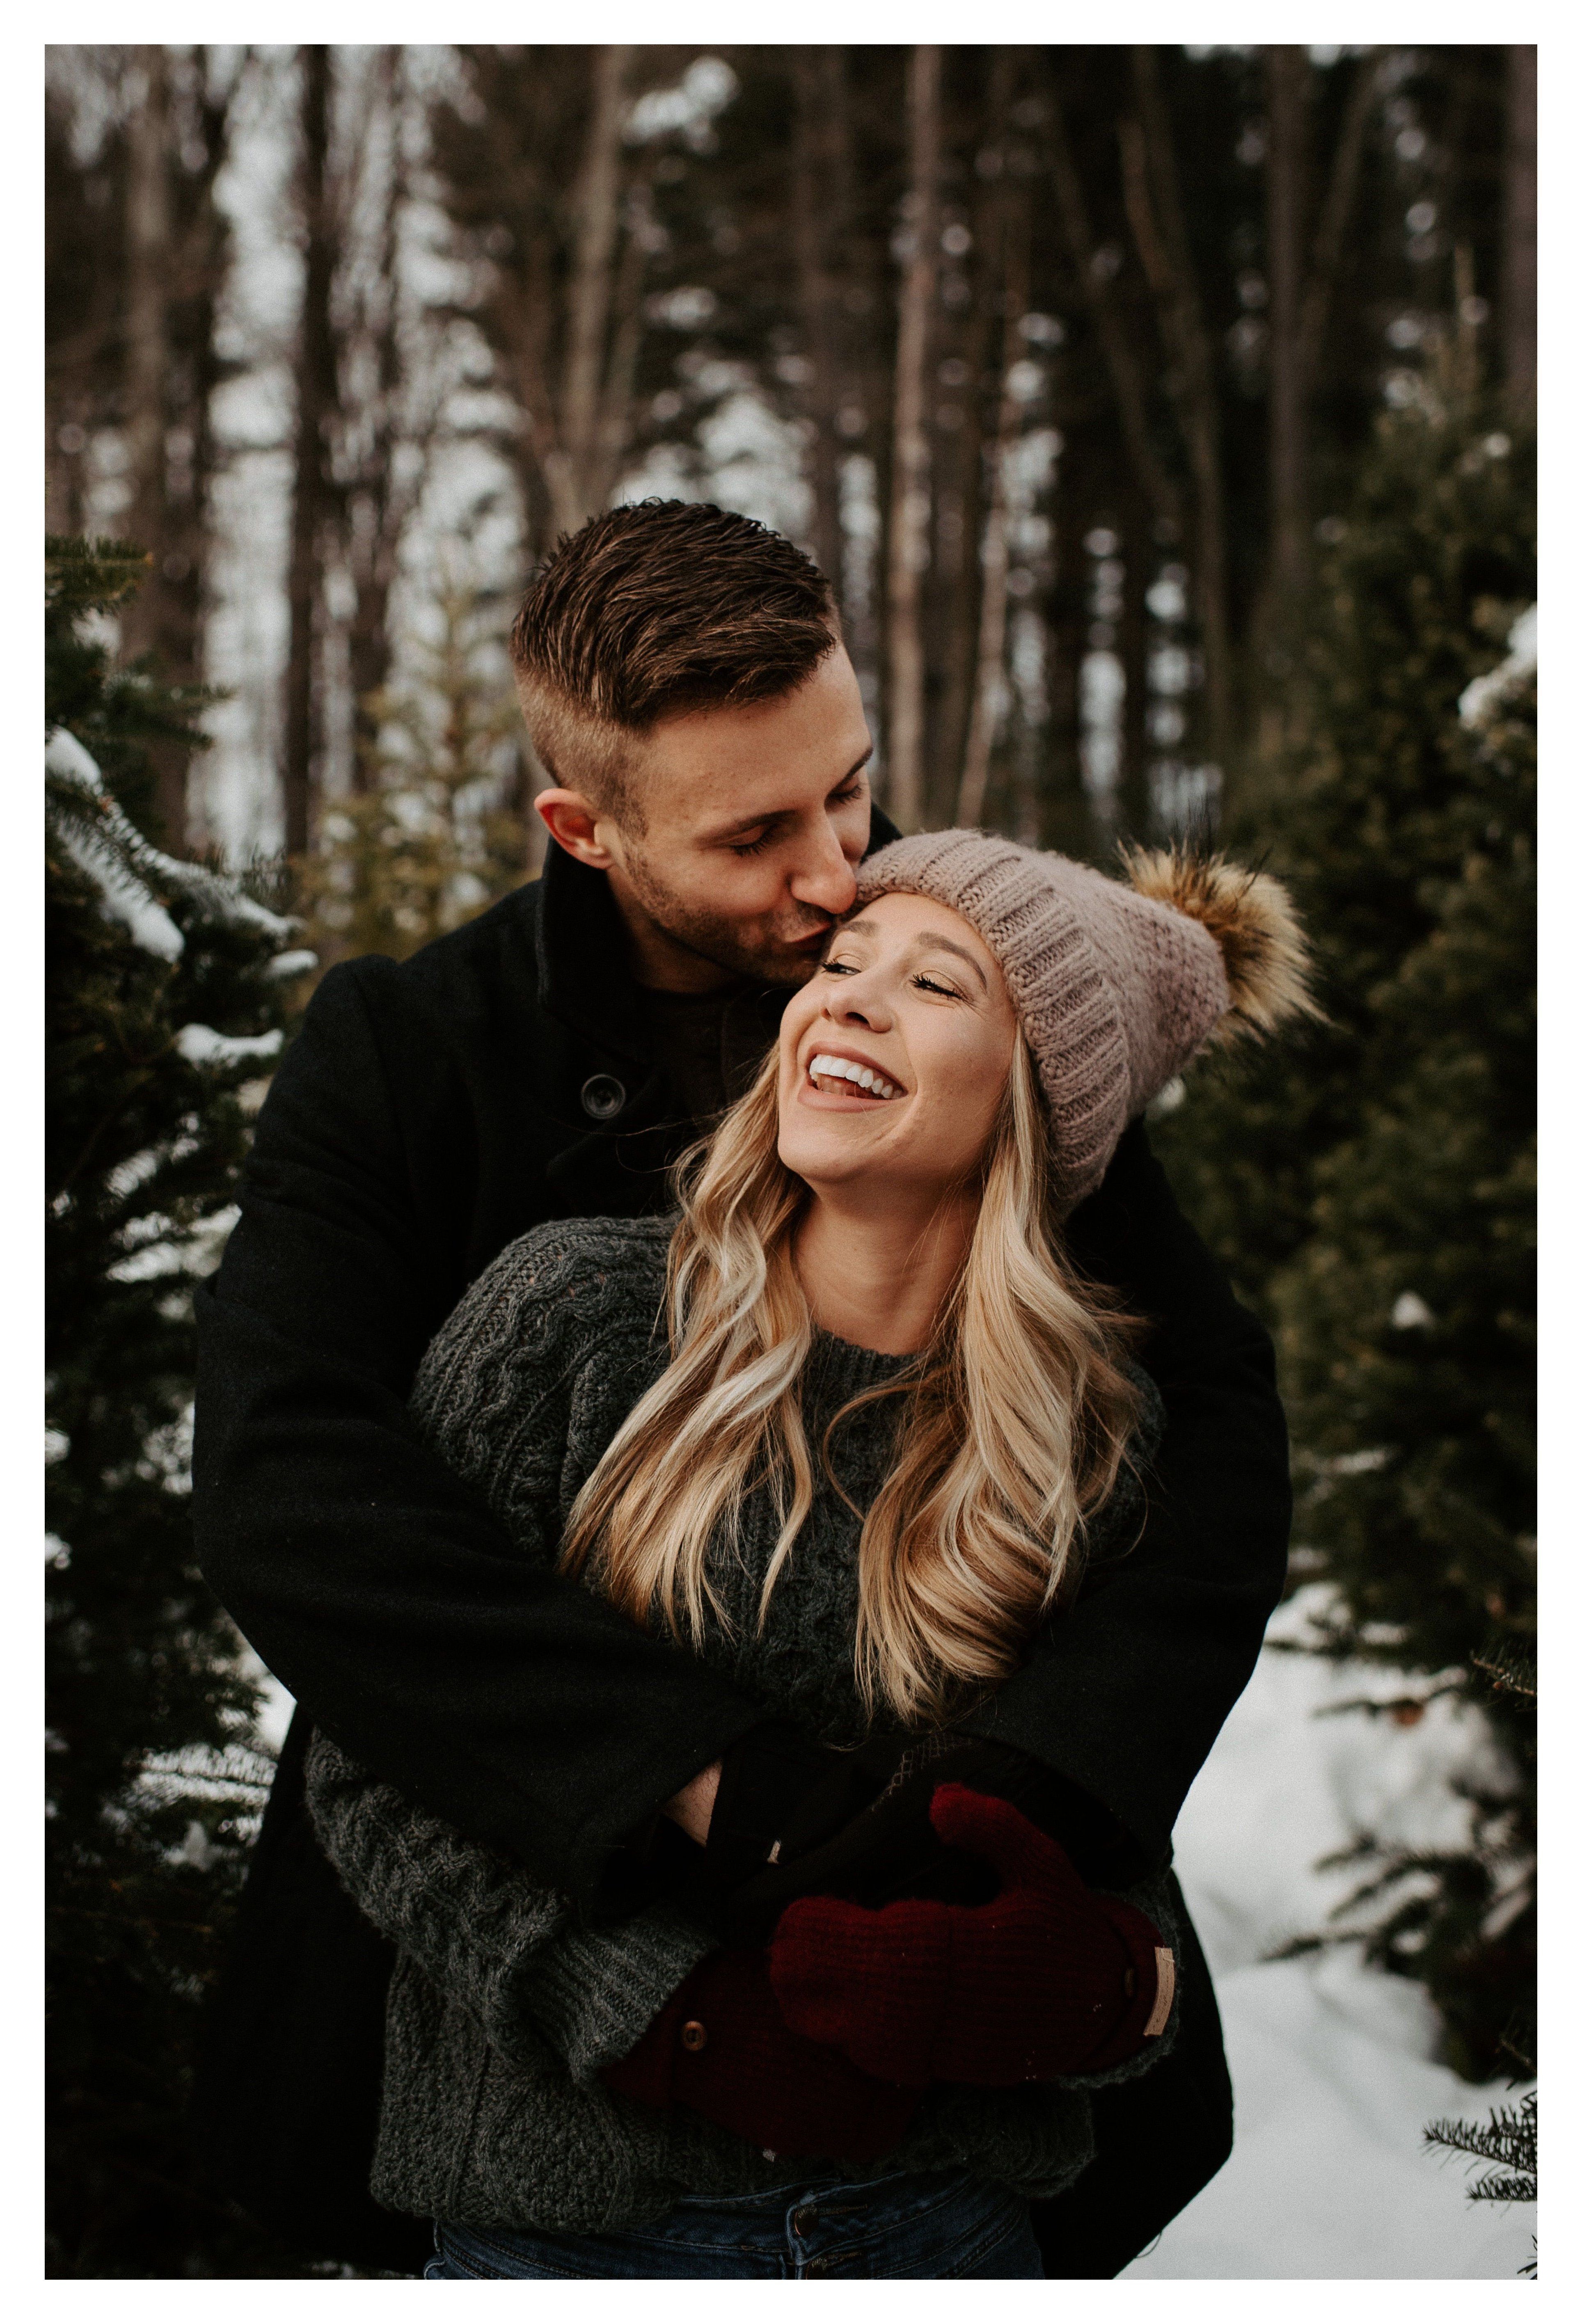 winter engagement photos -   17 christmas photoshoot couples outfits ideas